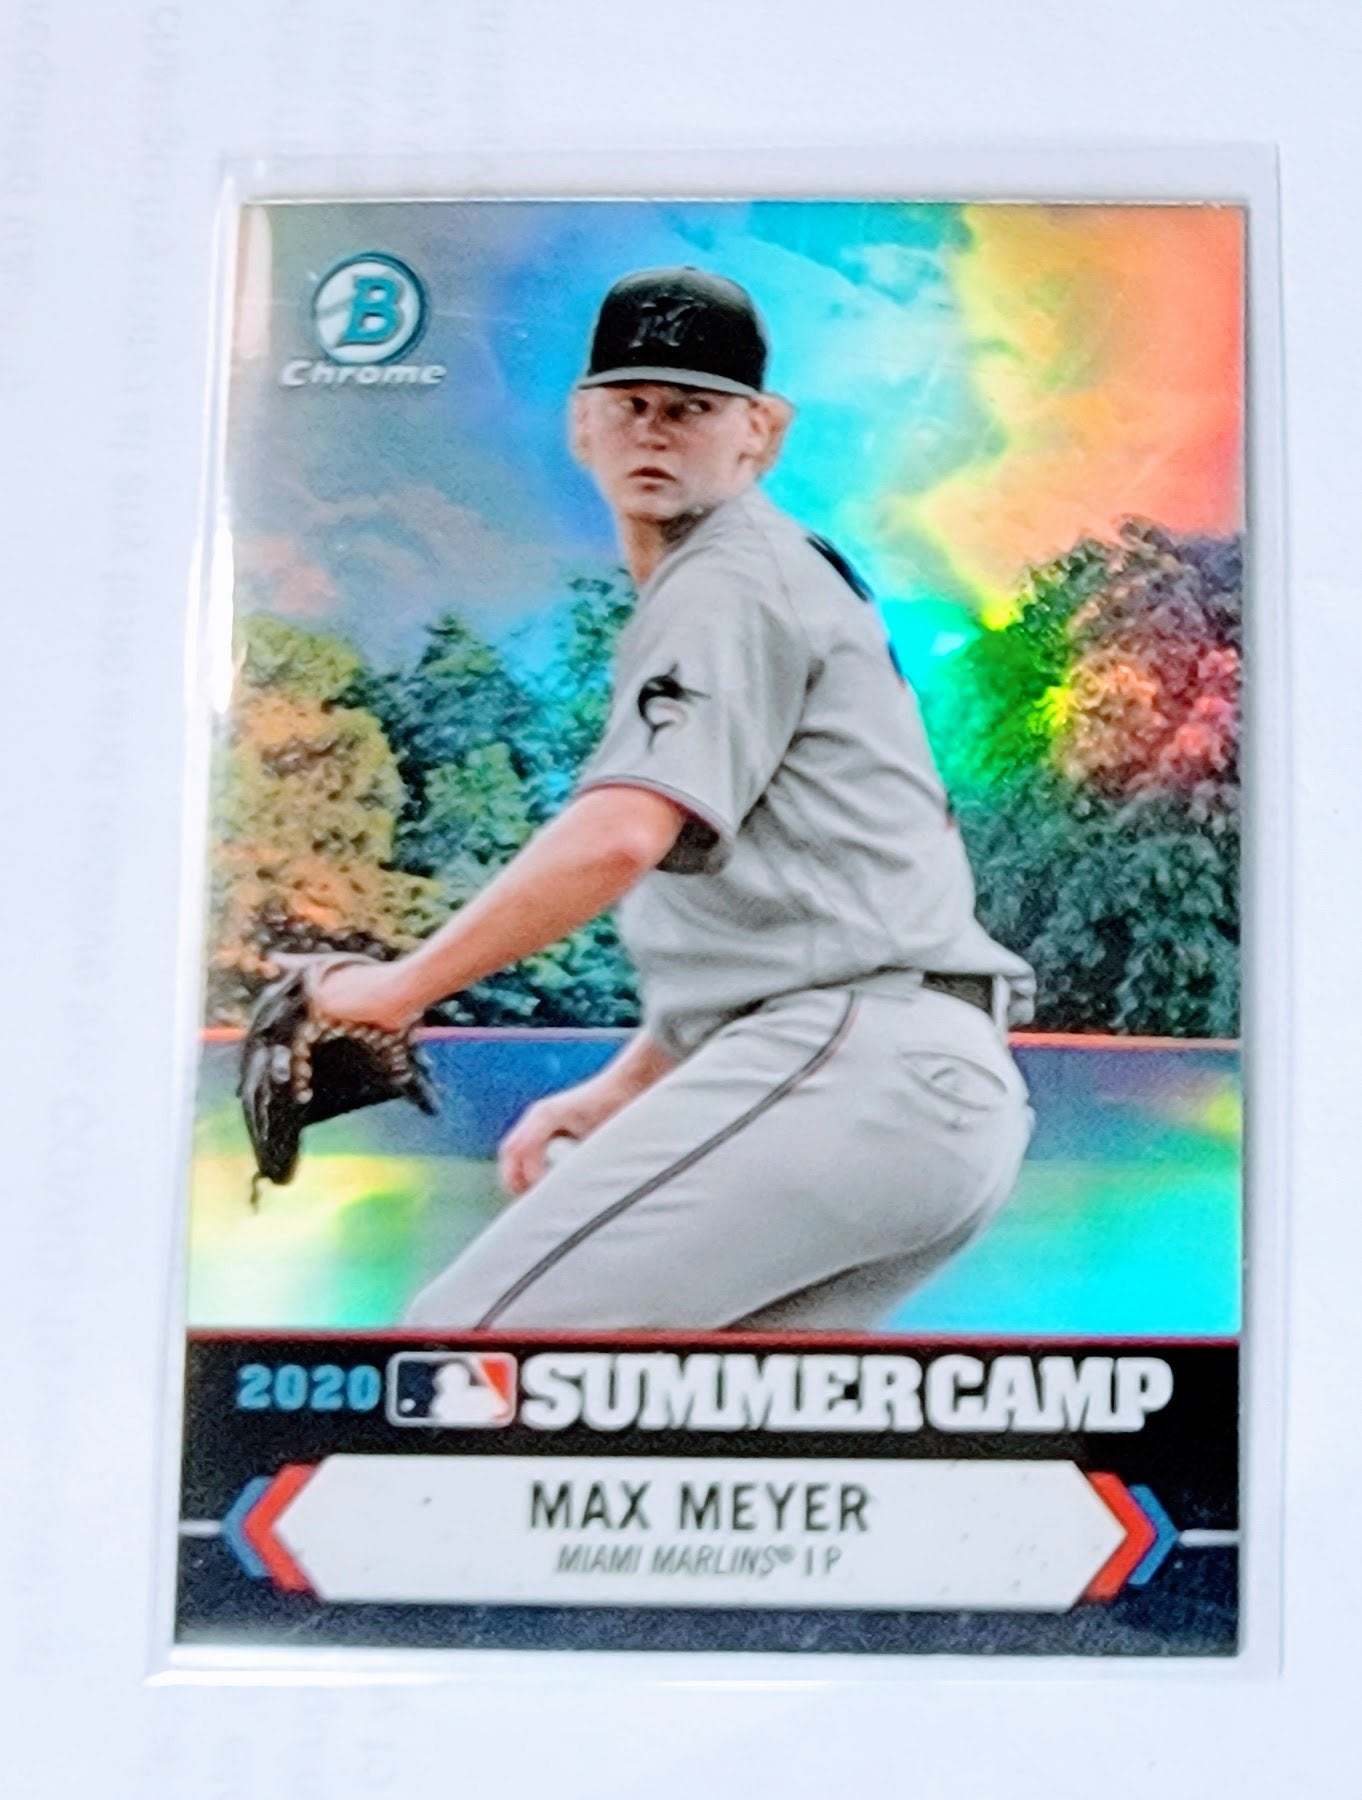 2021 Bowman Chrome Max Meyer Summercamp Refractor Baseball Trading Card SMCB1 simple Xclusive Collectibles   